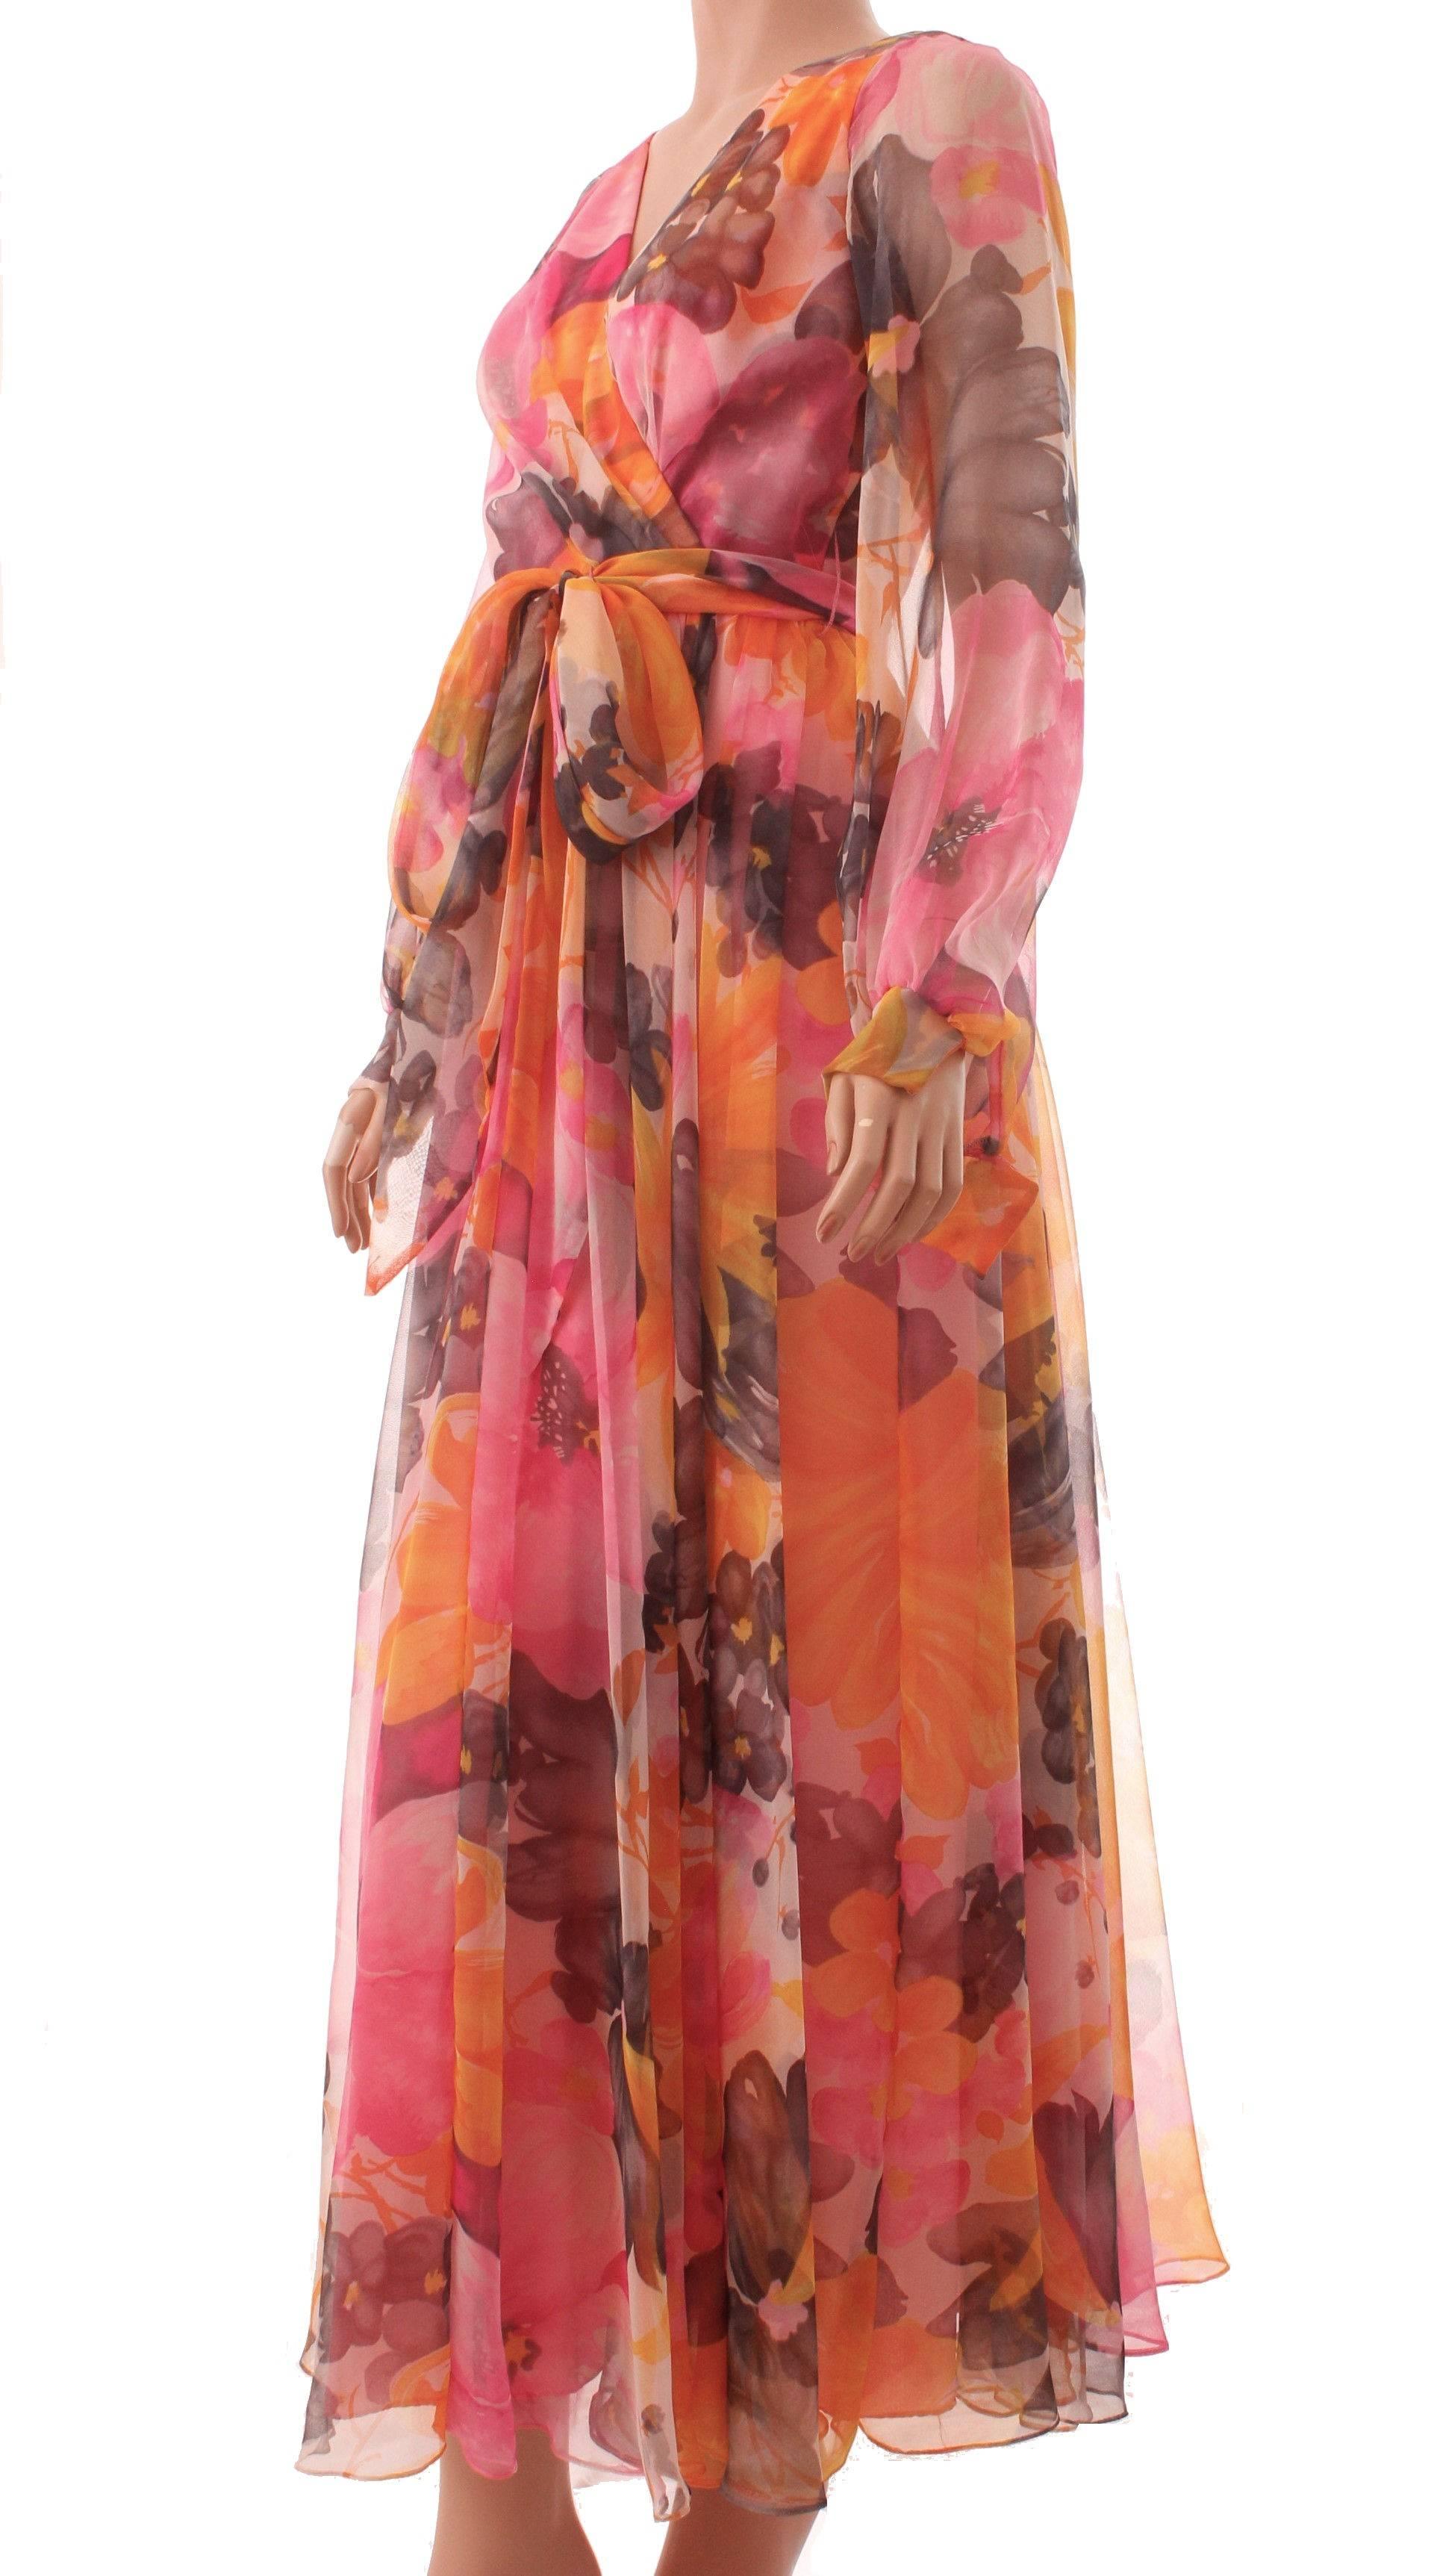 Here's a pretty maxi dress designed by Dupuis for Jack Bryan.  Made from a floral print sheer chiffon fabric, the sleeves are sheer and ethereal.  Fully lined at bodice and skirt.  In excellent condition for its age.  Tagged size 8, it measures,